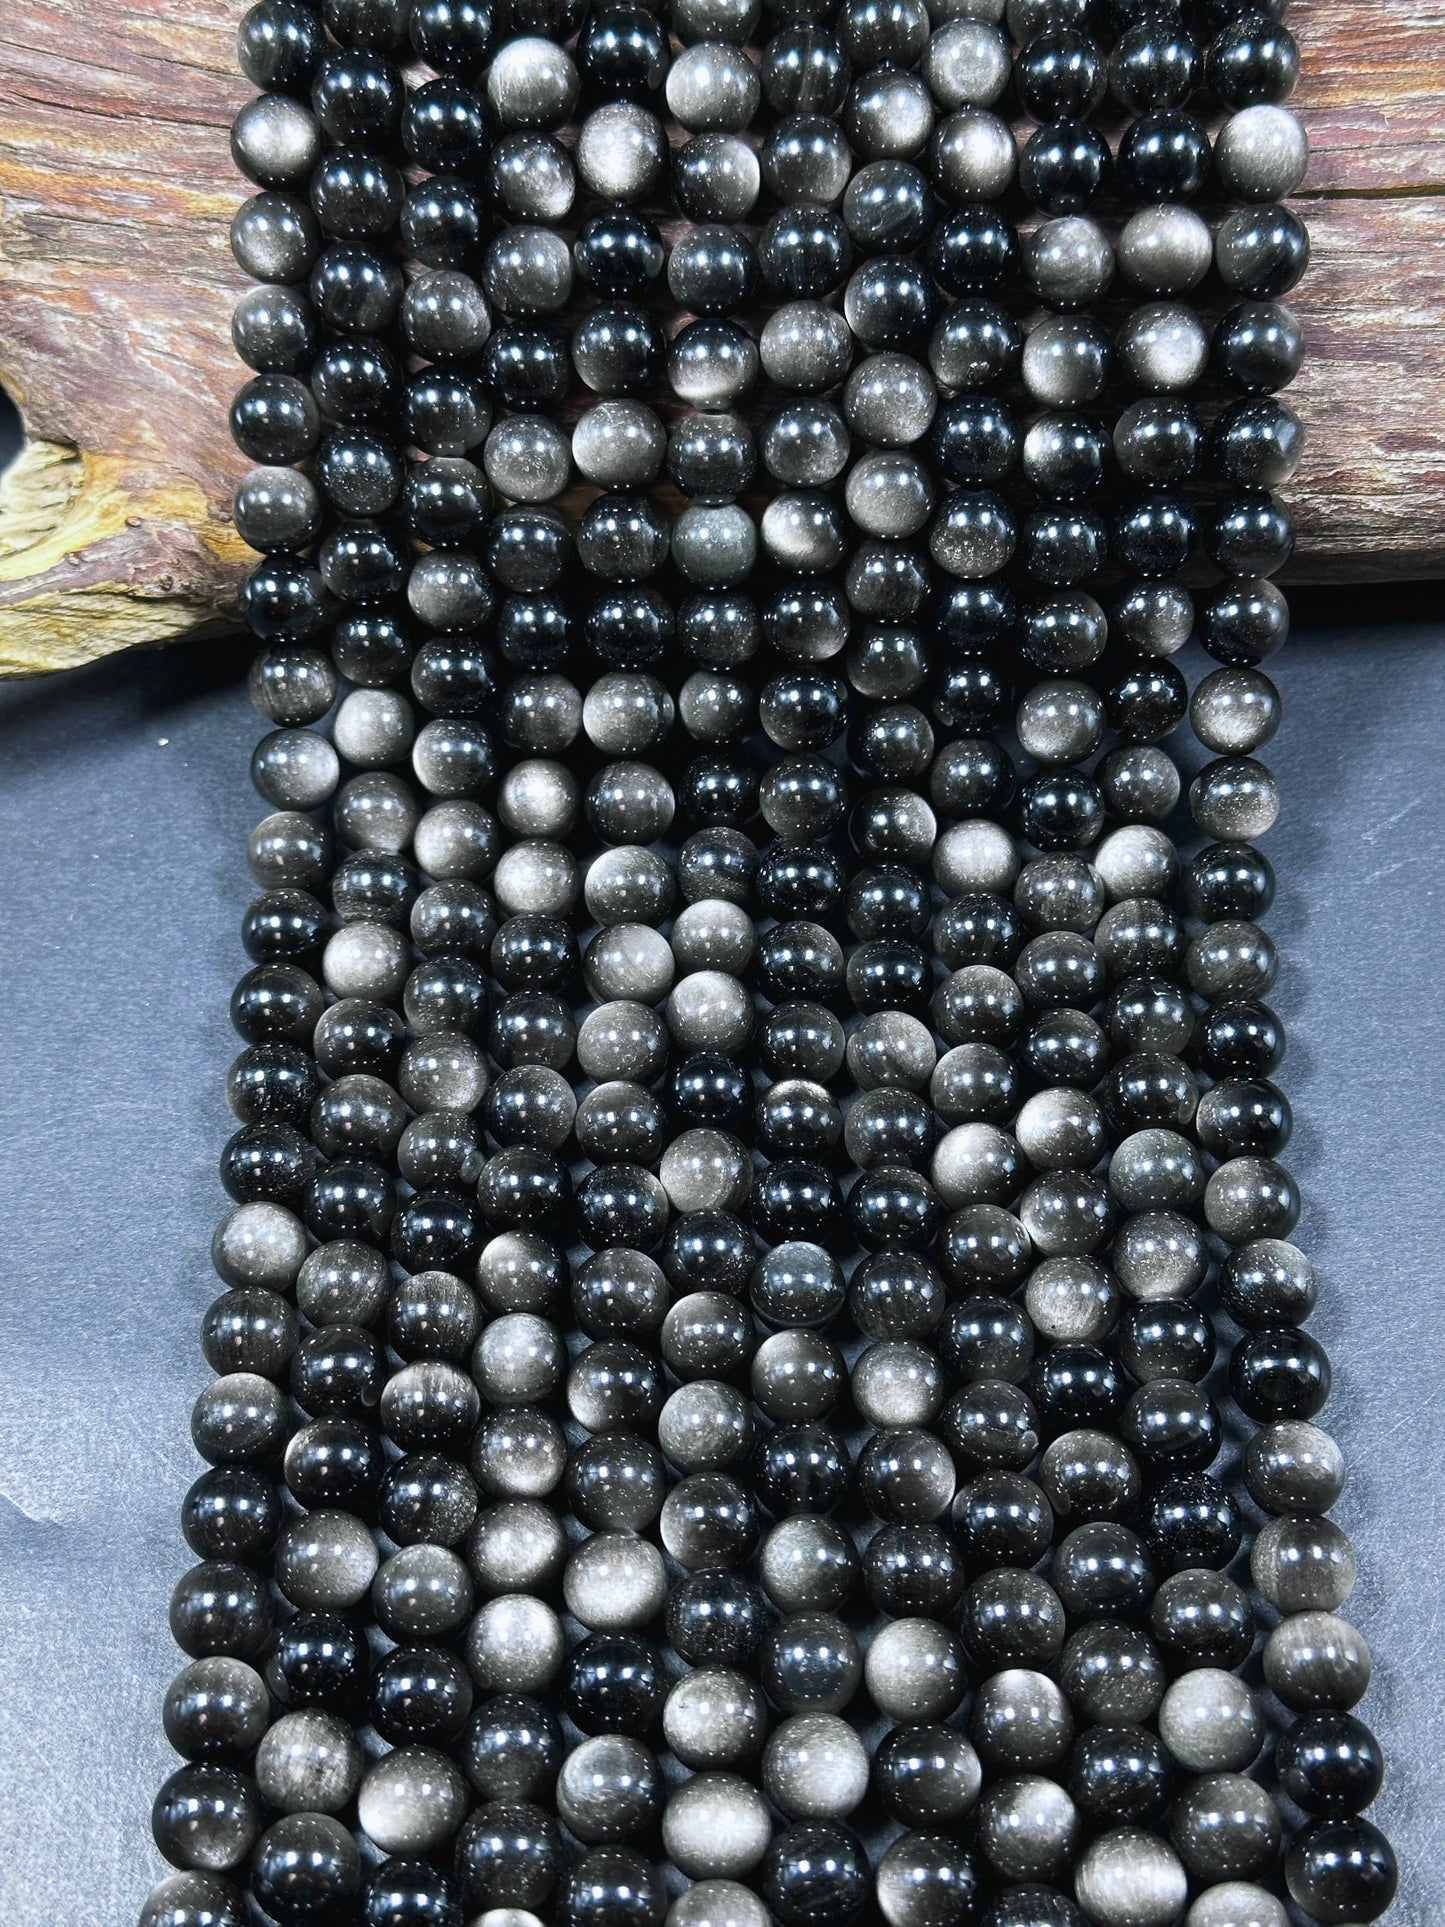 AAA Natural Silver Obsidian Gemstone Bead 6mm 8mm 10mm 12mm Round Bead, Gorgeous Black Silver Sheen Obsidian Beads, Excellent Quality Full Strand 15.5"